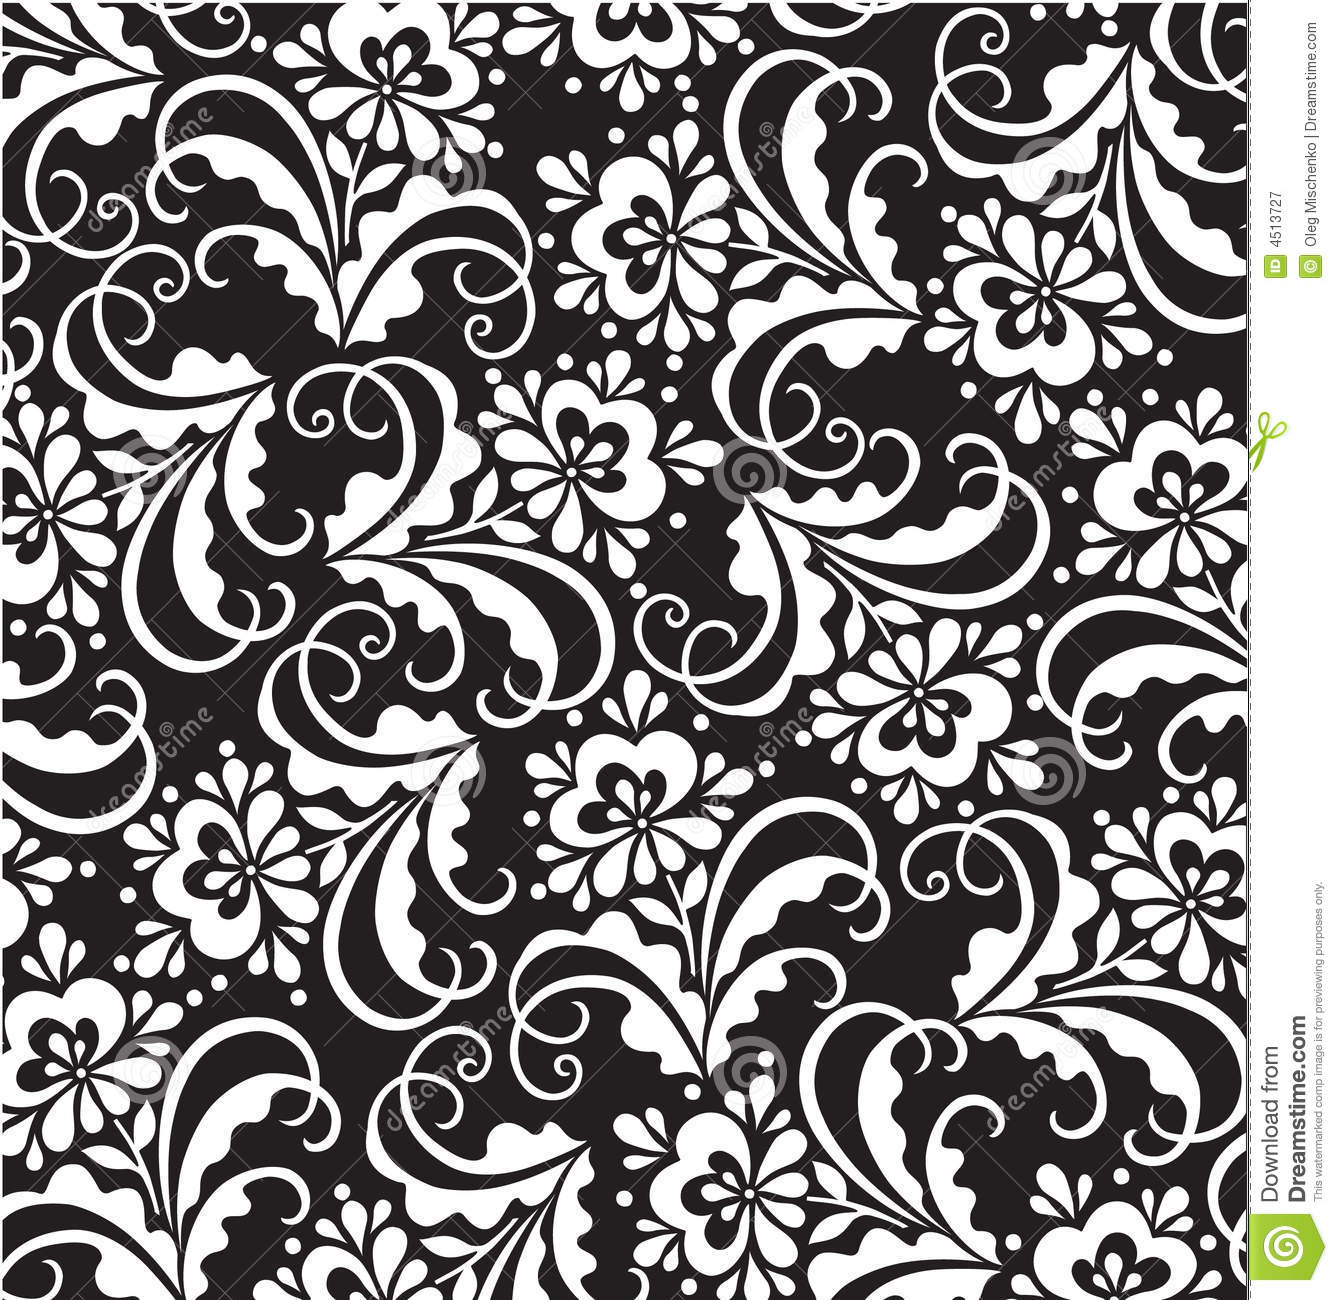 Black and White Floral Pattern Vector